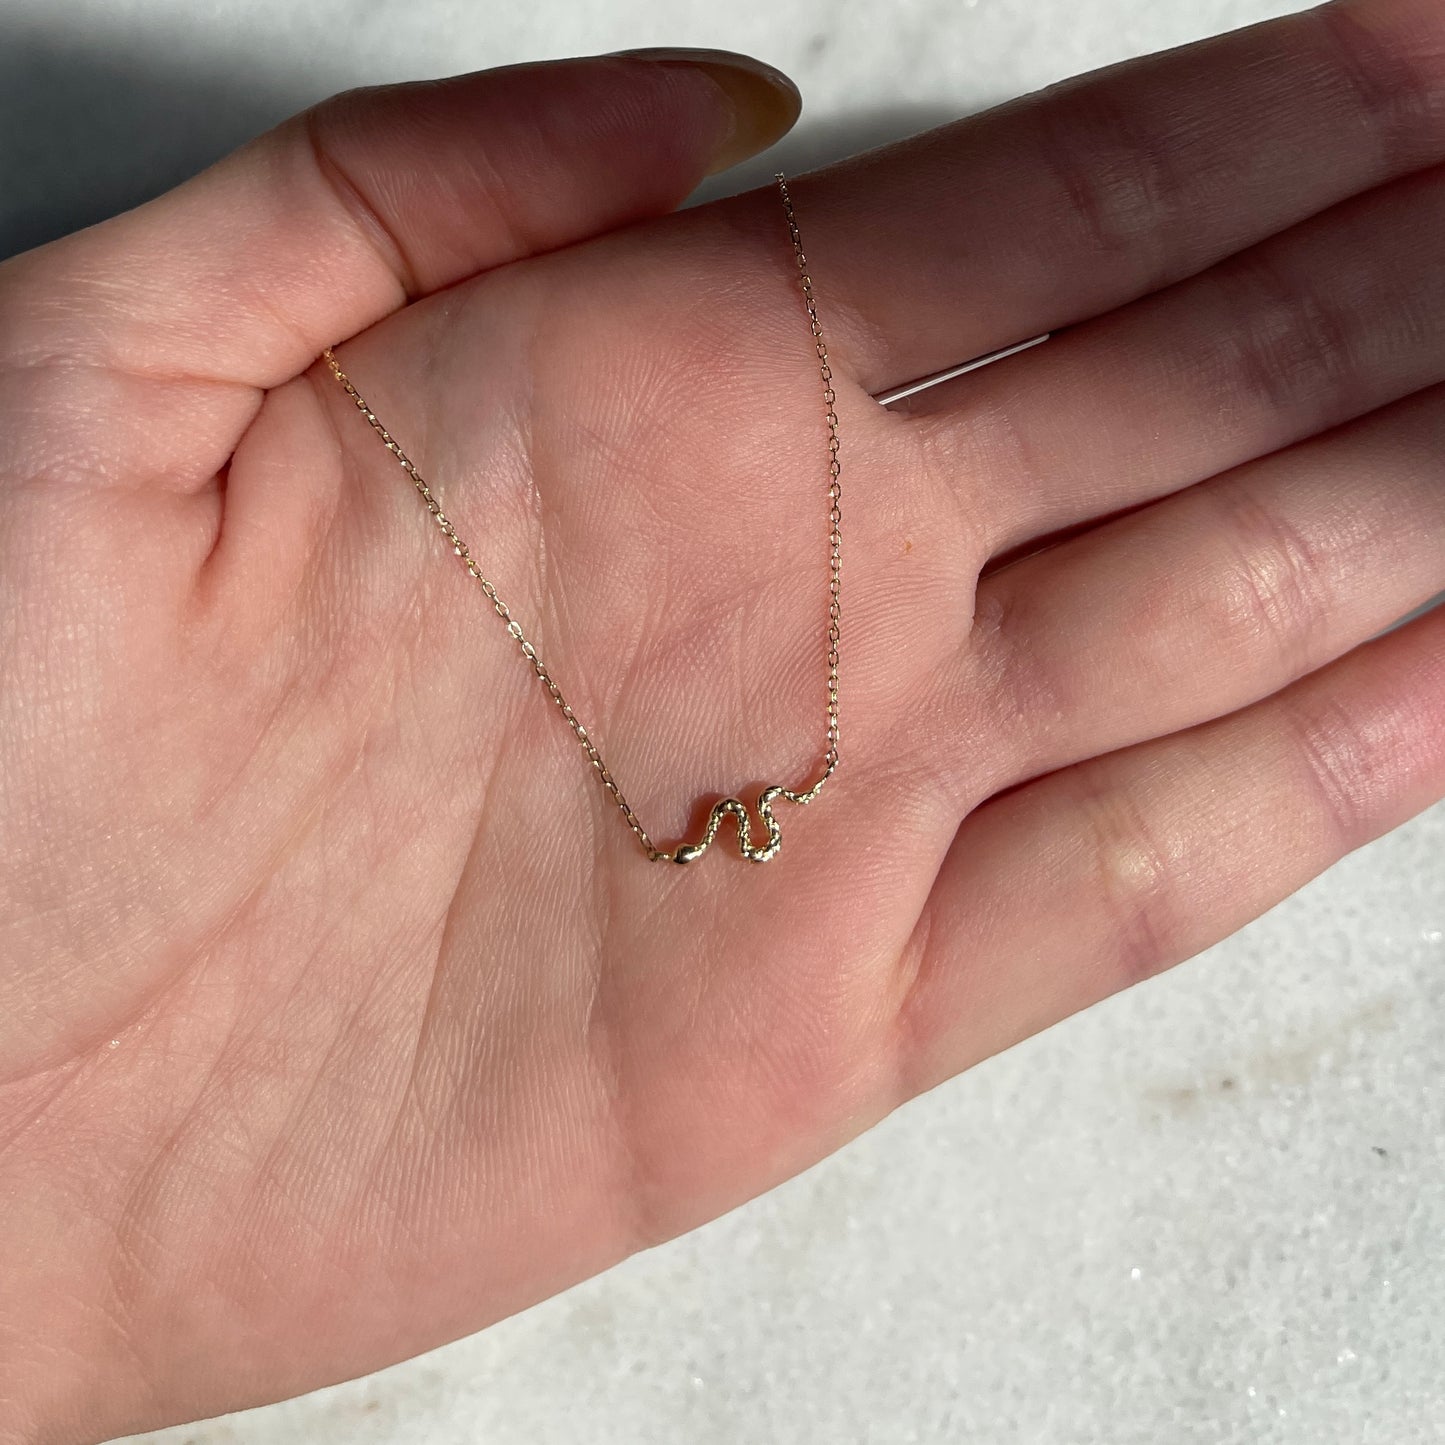 dainty 14k gold serpent necklace in palm of hand